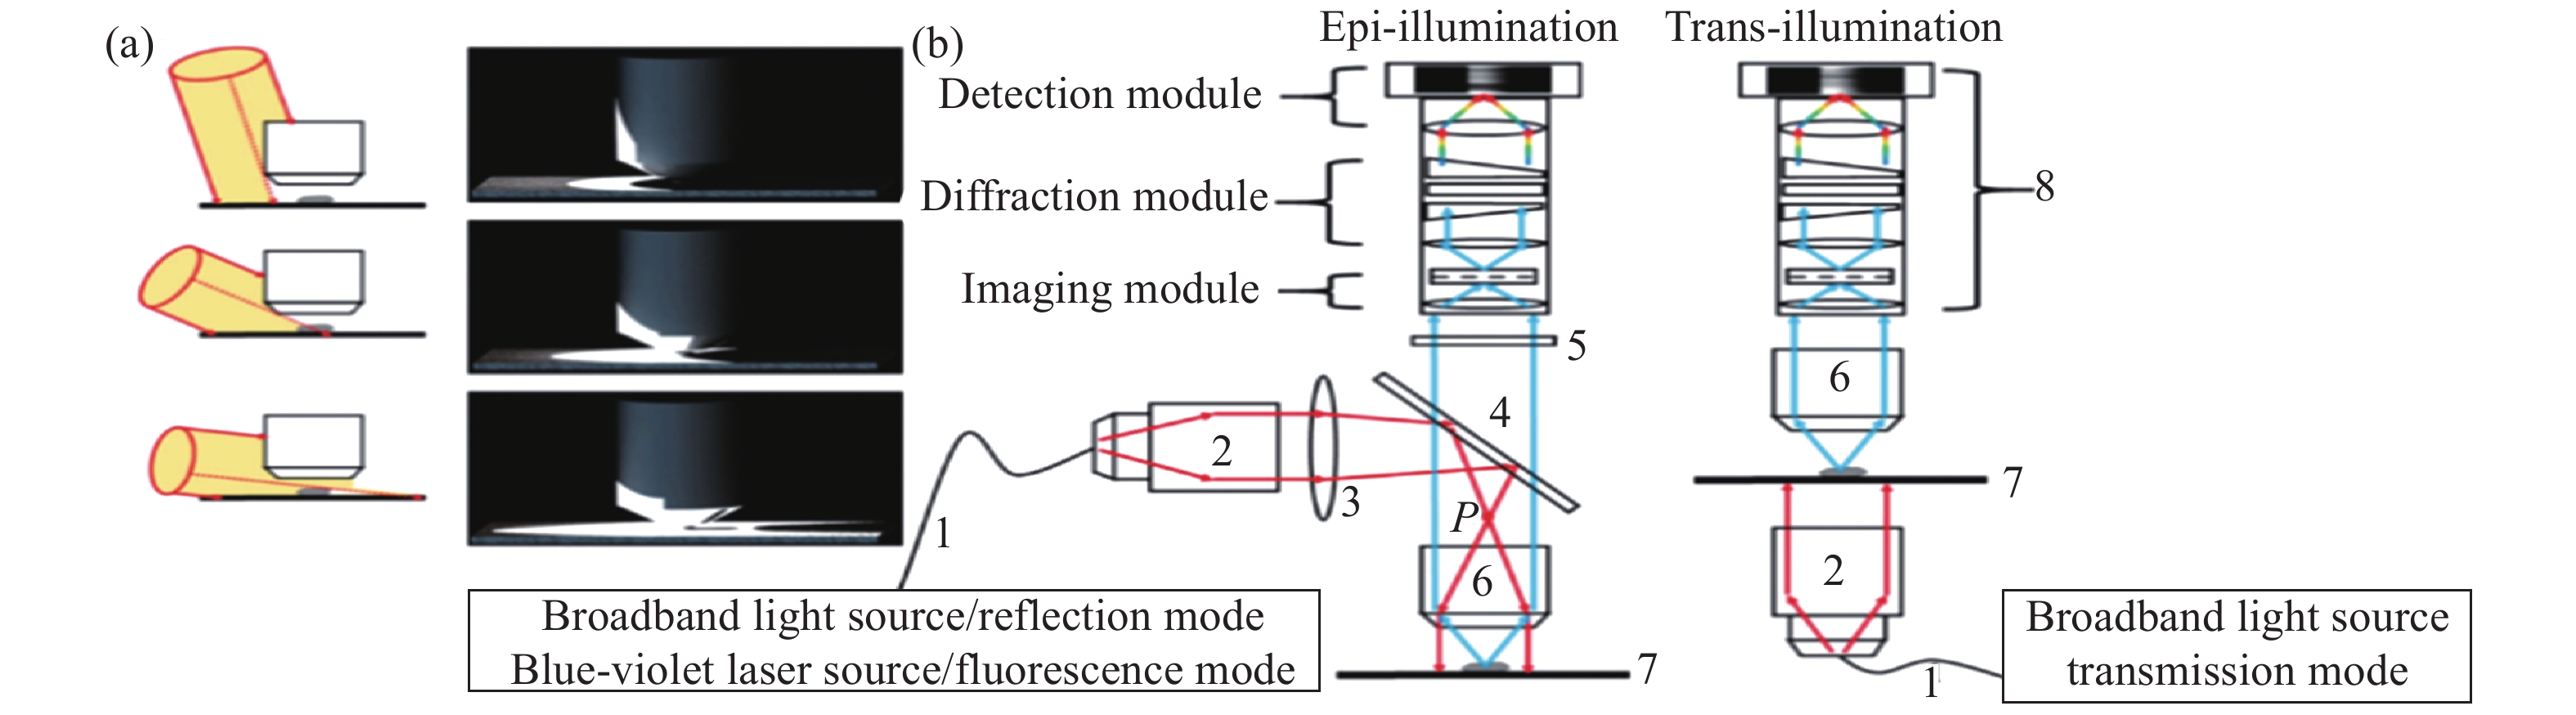 (a) Schematic diagram of the shadow generation under lateral illumination condition; (b) Illustration of multi-mode detections. Reflection mode and fluorescence mode use epi-illumination, while transmission mode employs trans-illumination. Schematic diagram of each component: 1. Single mode fiber, 2. Fiber collimator, 3. Doublet lens, 4. Beam splitter, 5. Long pass filter, 6. Objective, 7. Sample and motion stage, 8. Infinity-corrected hyperspectral imaging system, consisting of the imaging module[27]